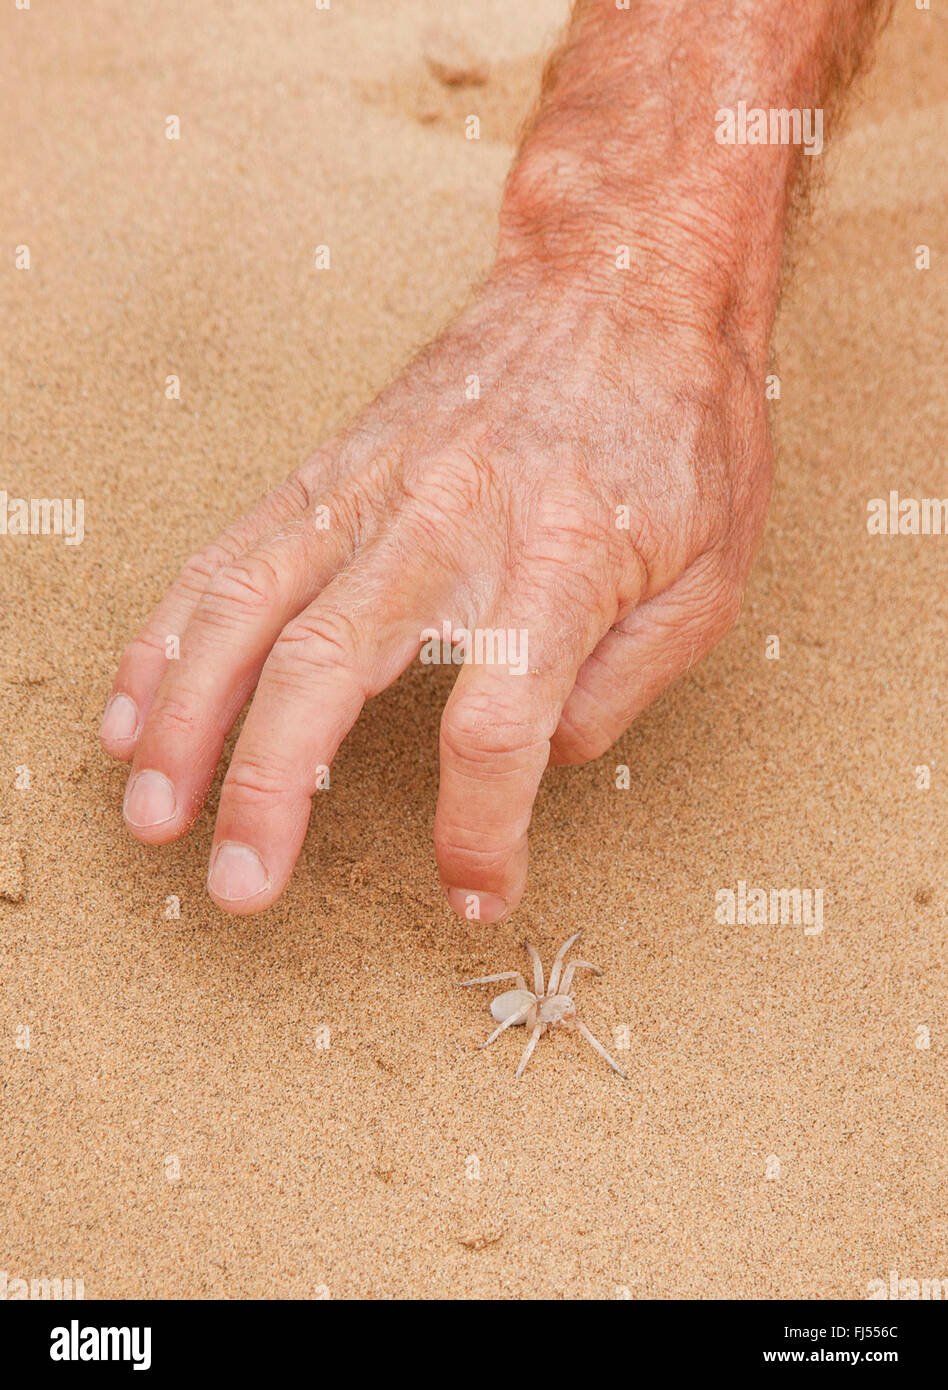 White Lady (Leucorchestris arenicola), guide finding a Dancing White Lady Spider in the sand, Namibia, Dorob National Park, Swakopmund Stock Photo